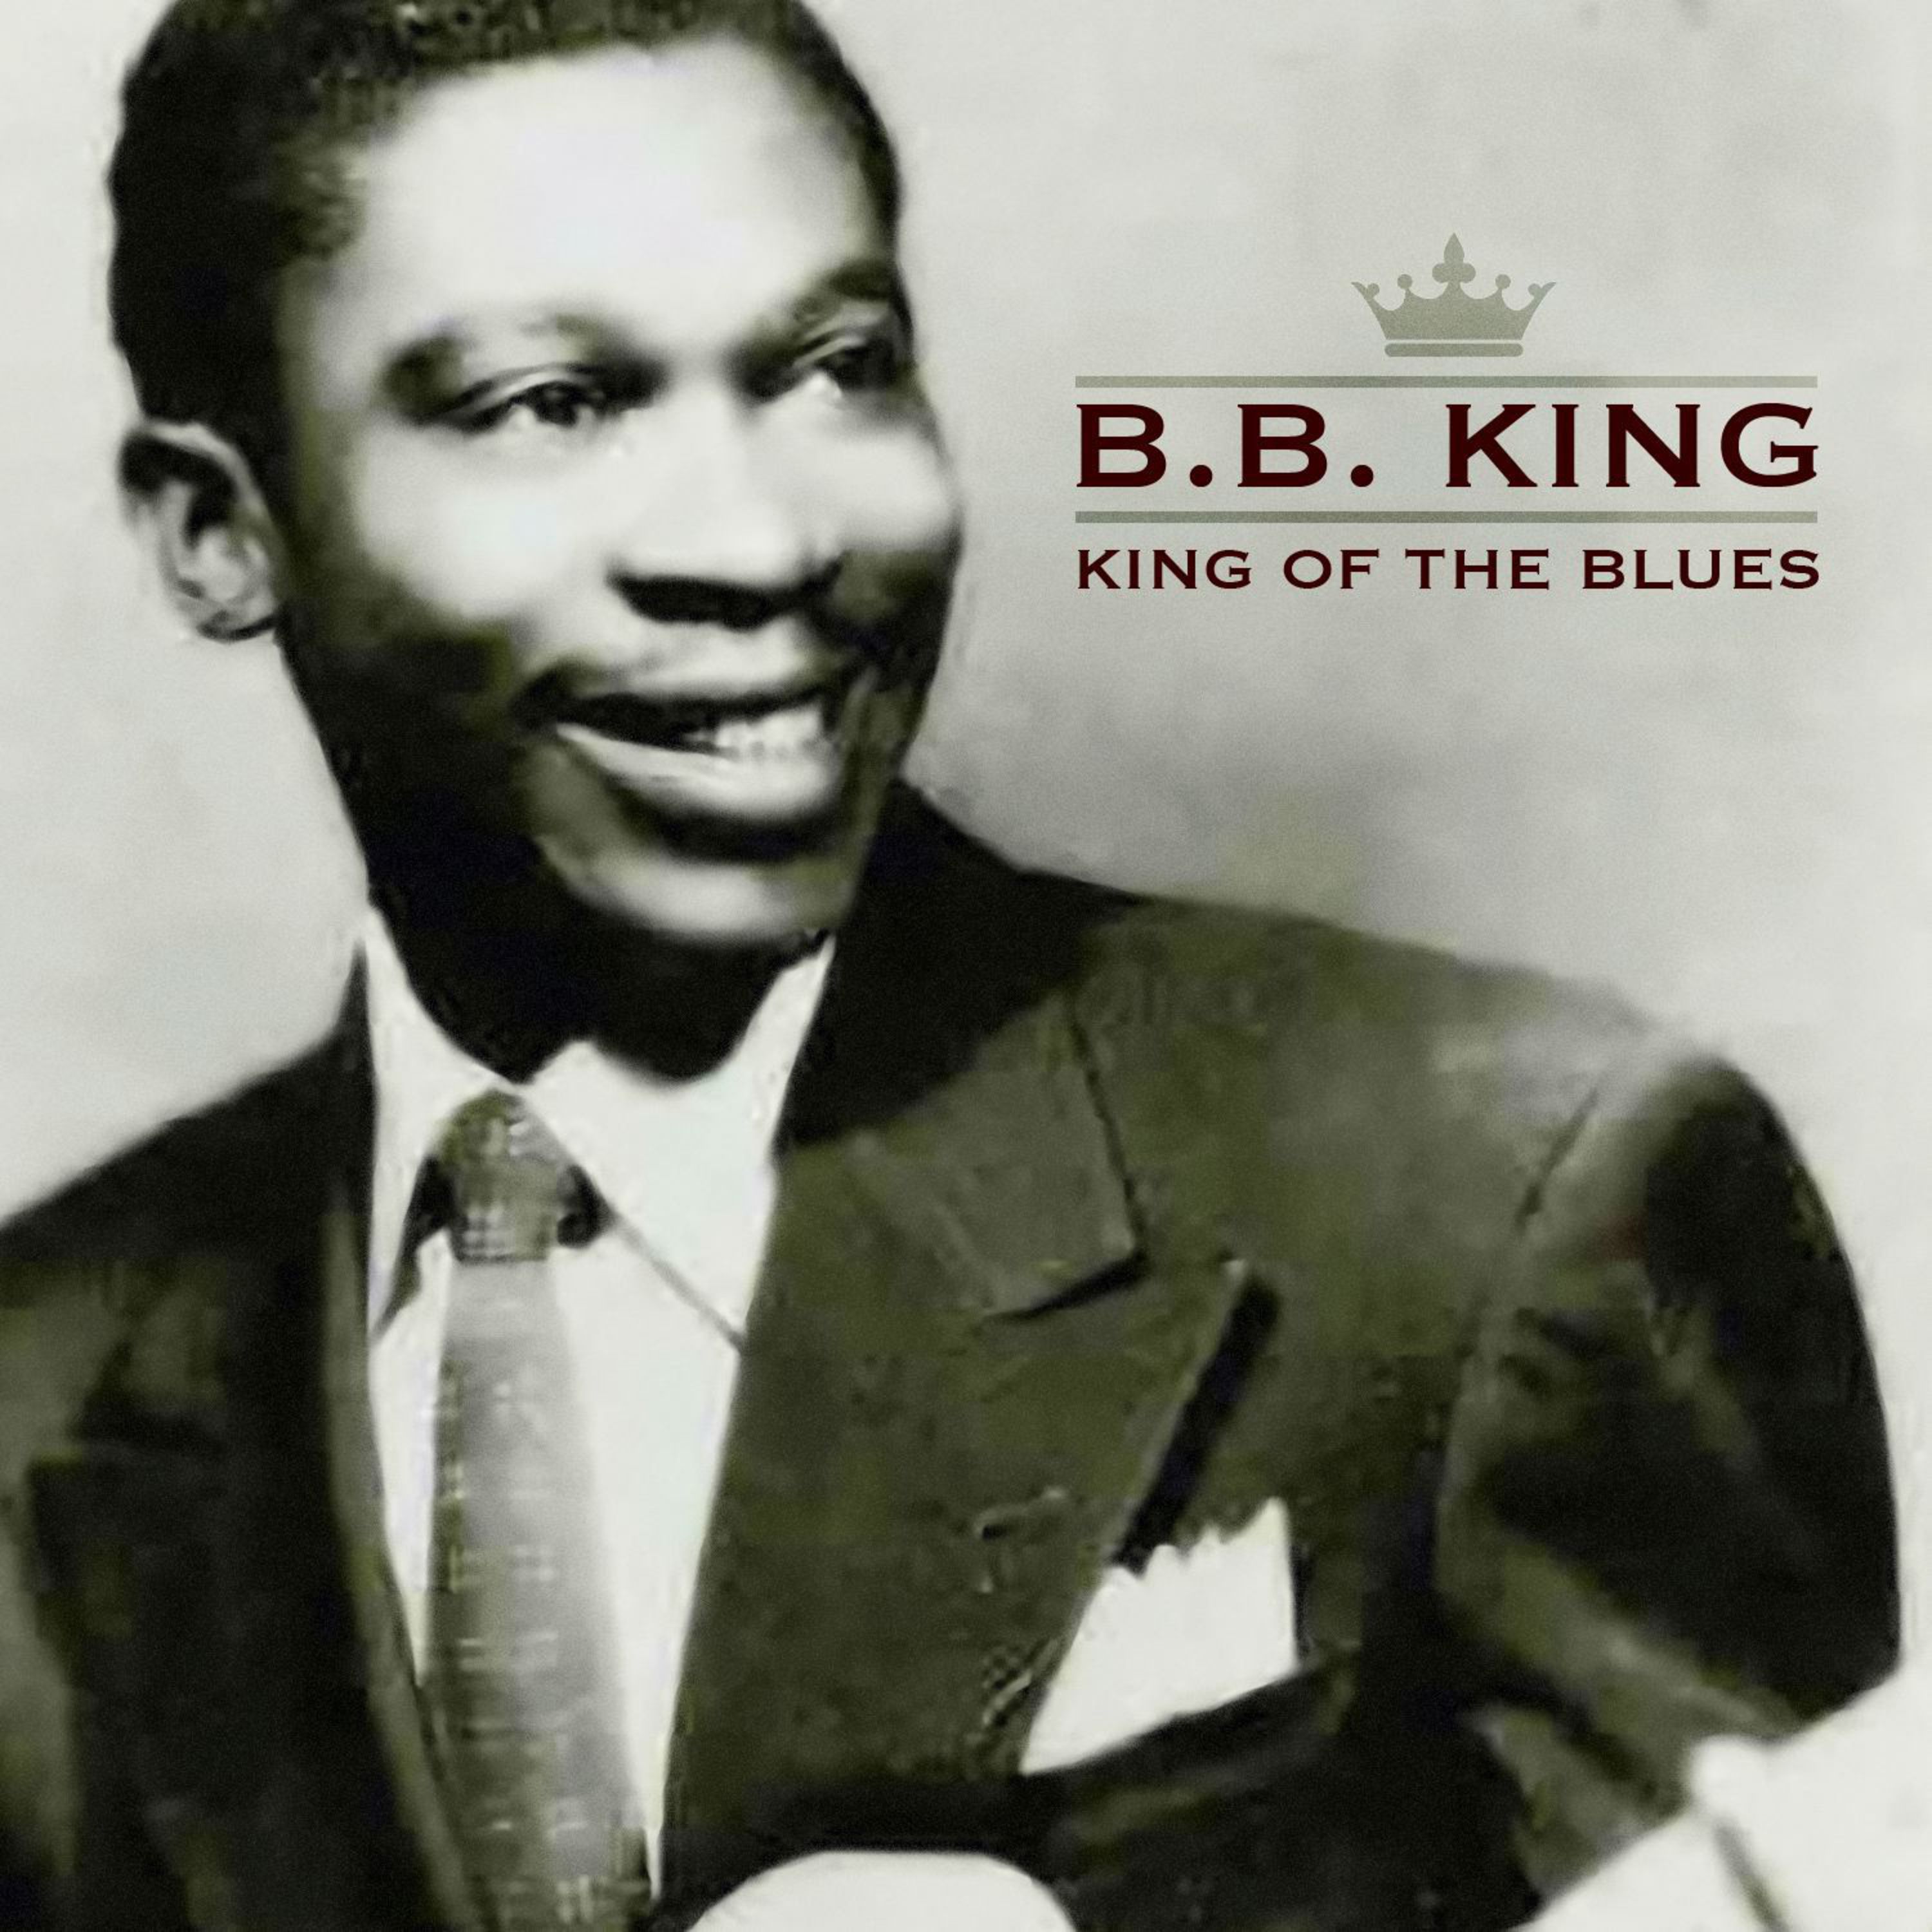 King of the Blues (A Collection of 50 Memorable Songs from the King of the Blues)